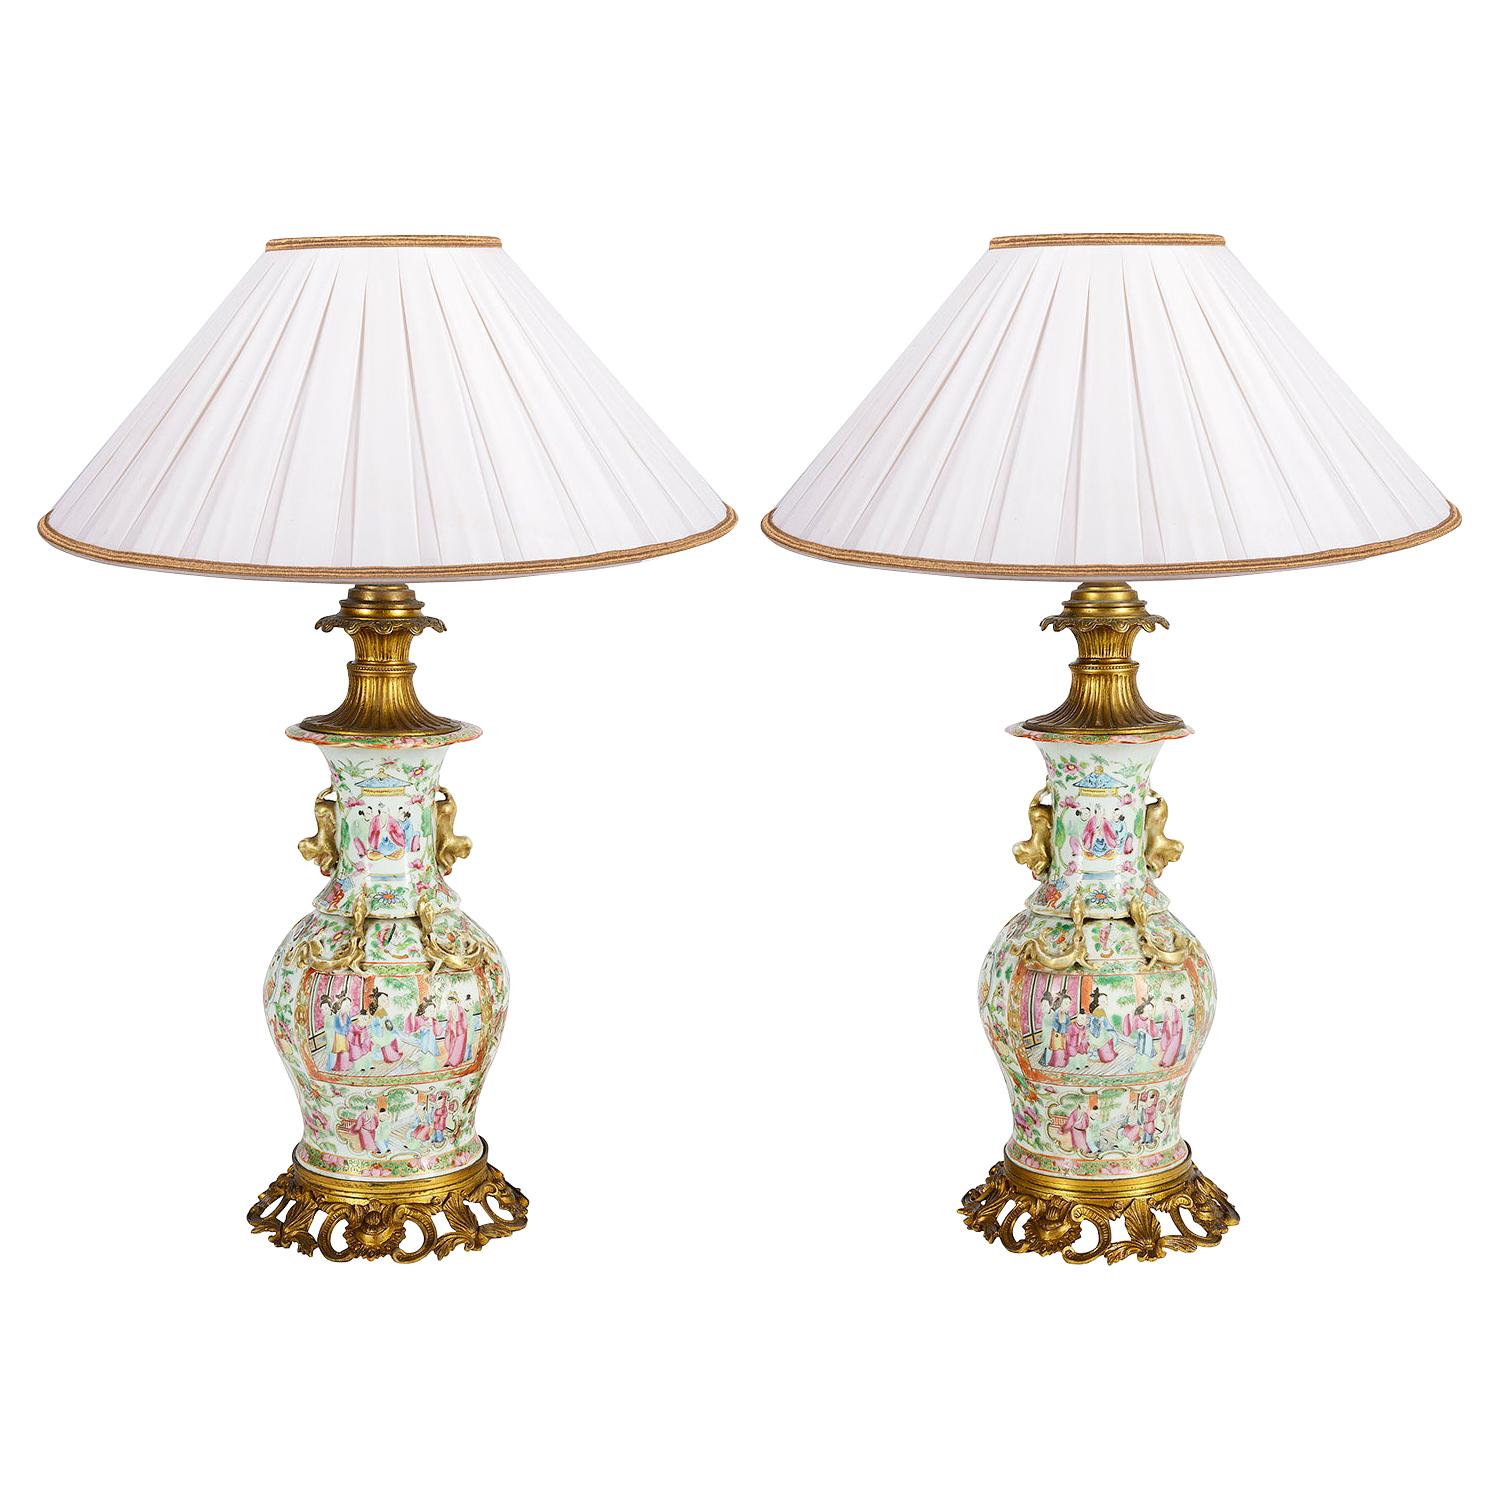 Pair of 19th Century Rose Medallion Ormolu Mounted Vases / Lamps